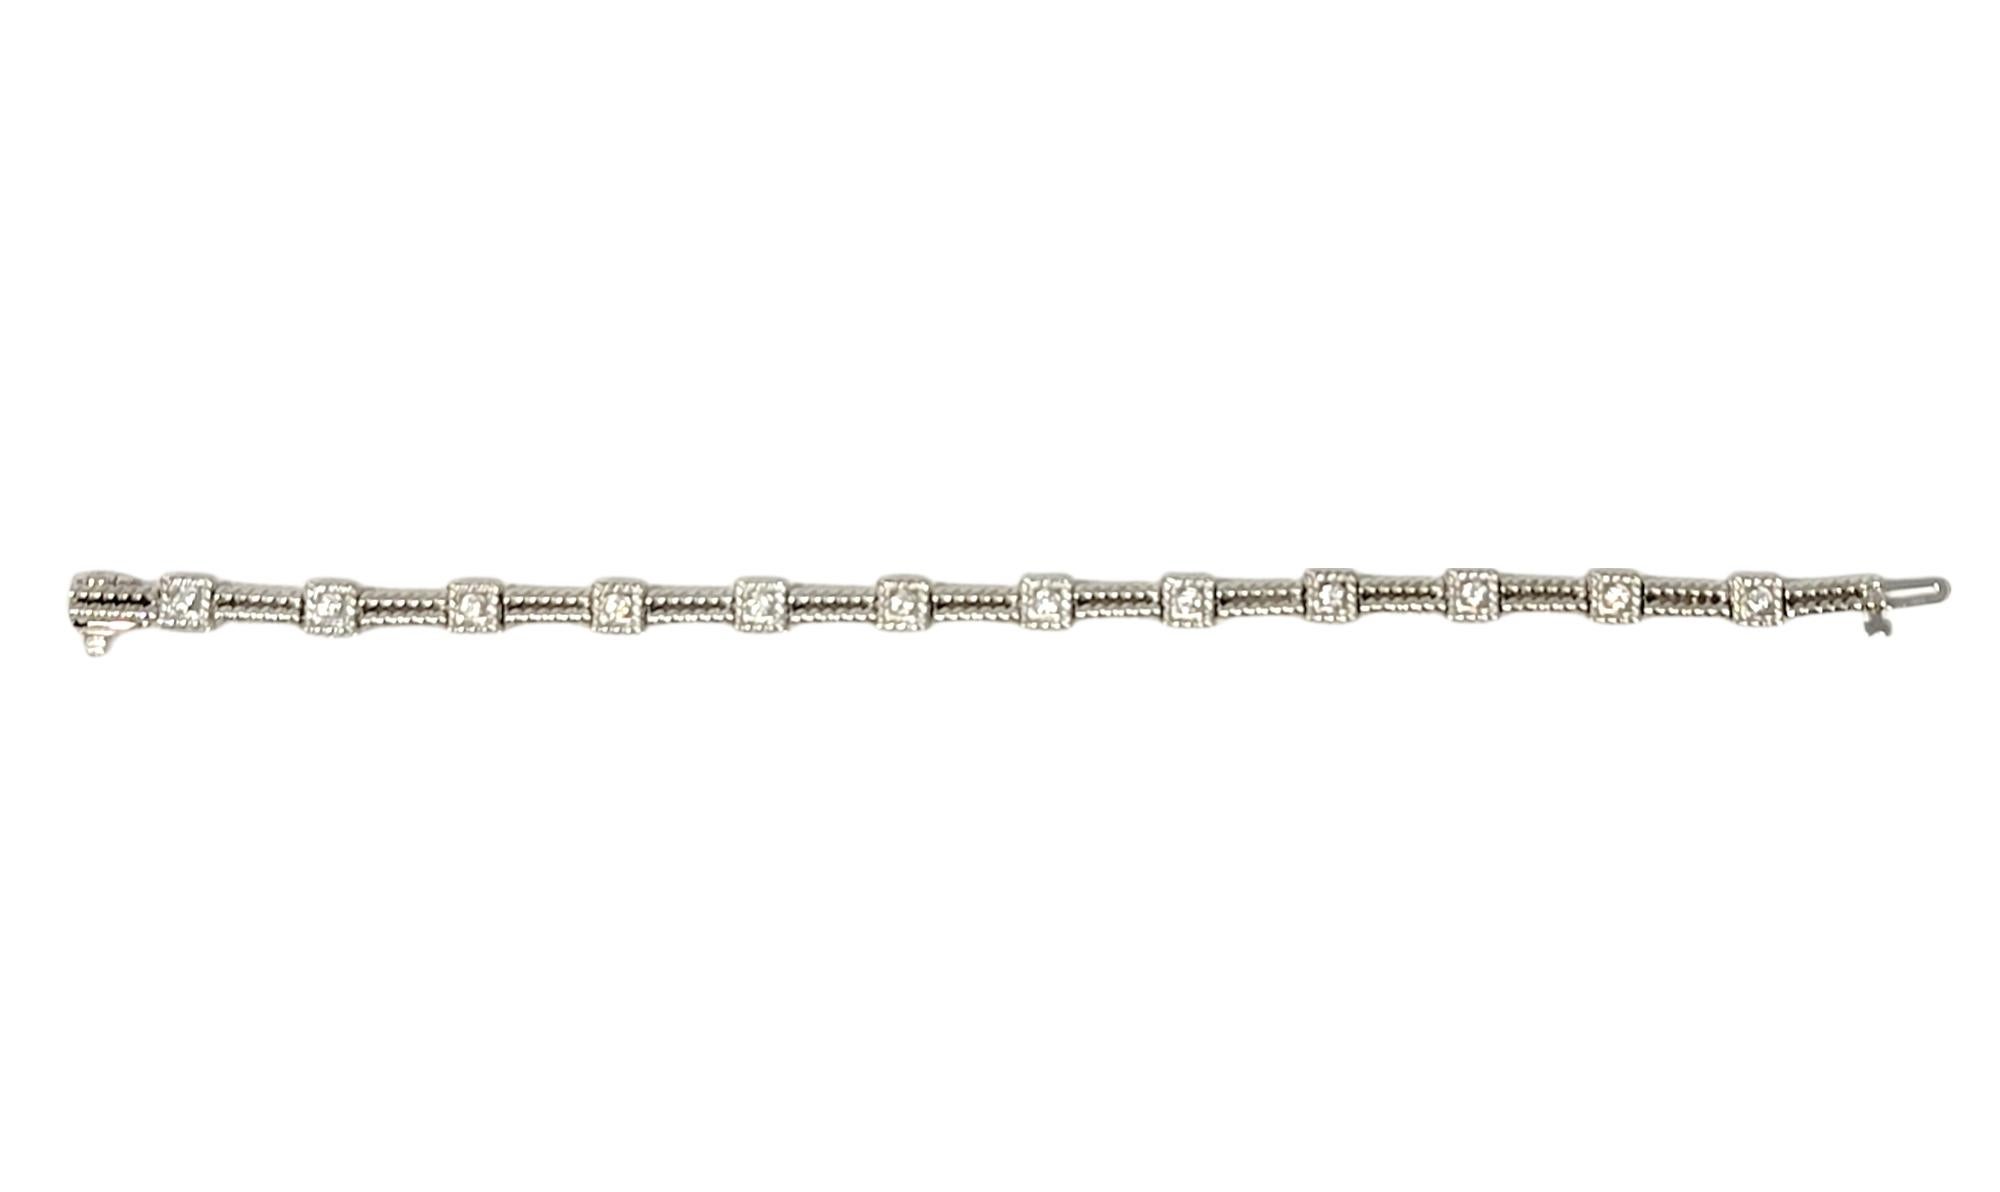 Stunning diamond station bracelet with a twisted cable design set in polished white gold. 

Metal: 14 Karat White Gold
Natural Diamonds: .72 carat total weight
Diamond cut: Round Brilliant
Diamond color: F
Diamond clarity: VS
Length: 6.75